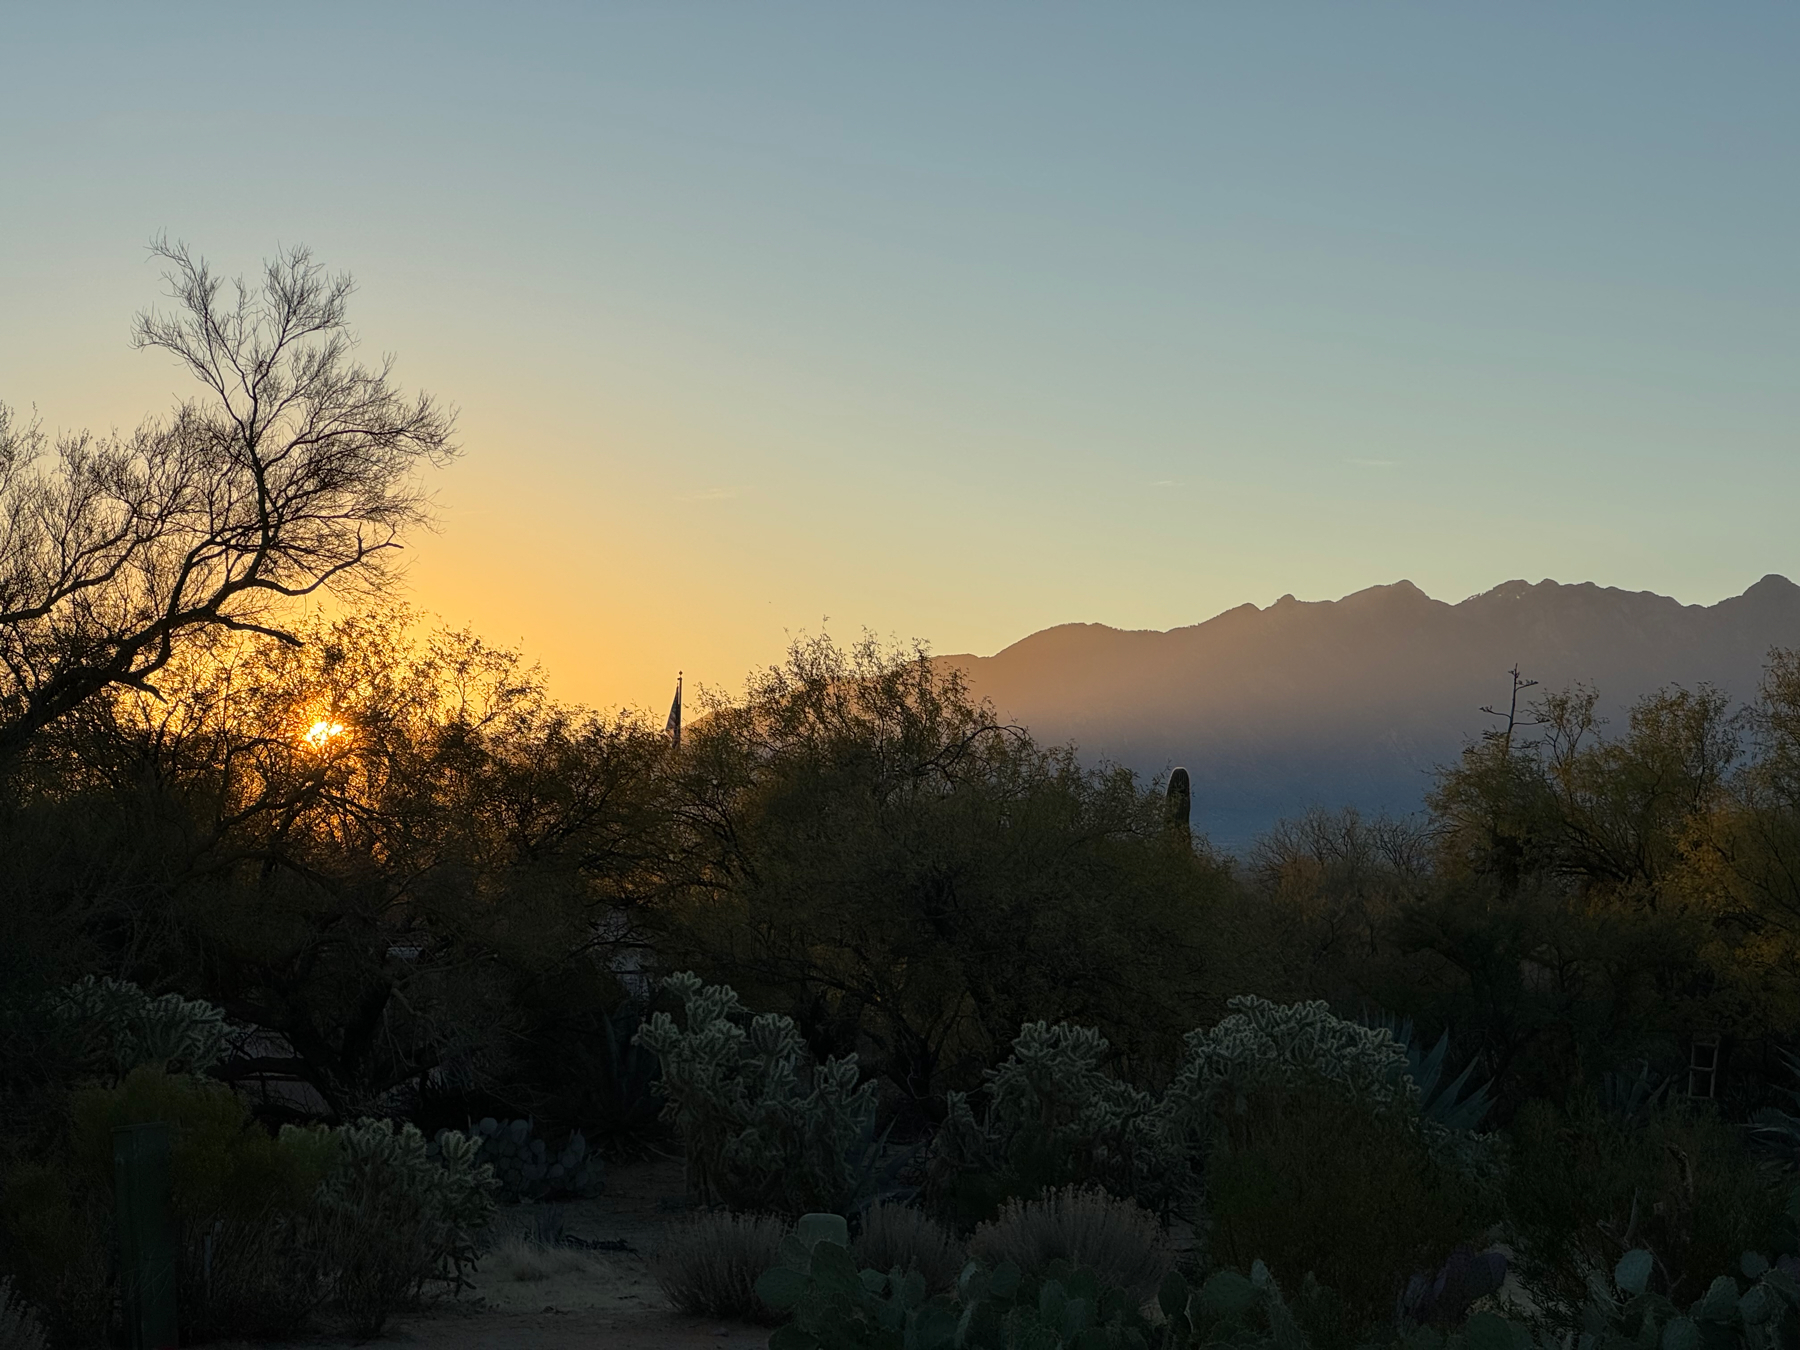 Sunrise over a desert landscape with silhouettes of various cacti and trees against a backdrop of mountains and a clear sky.